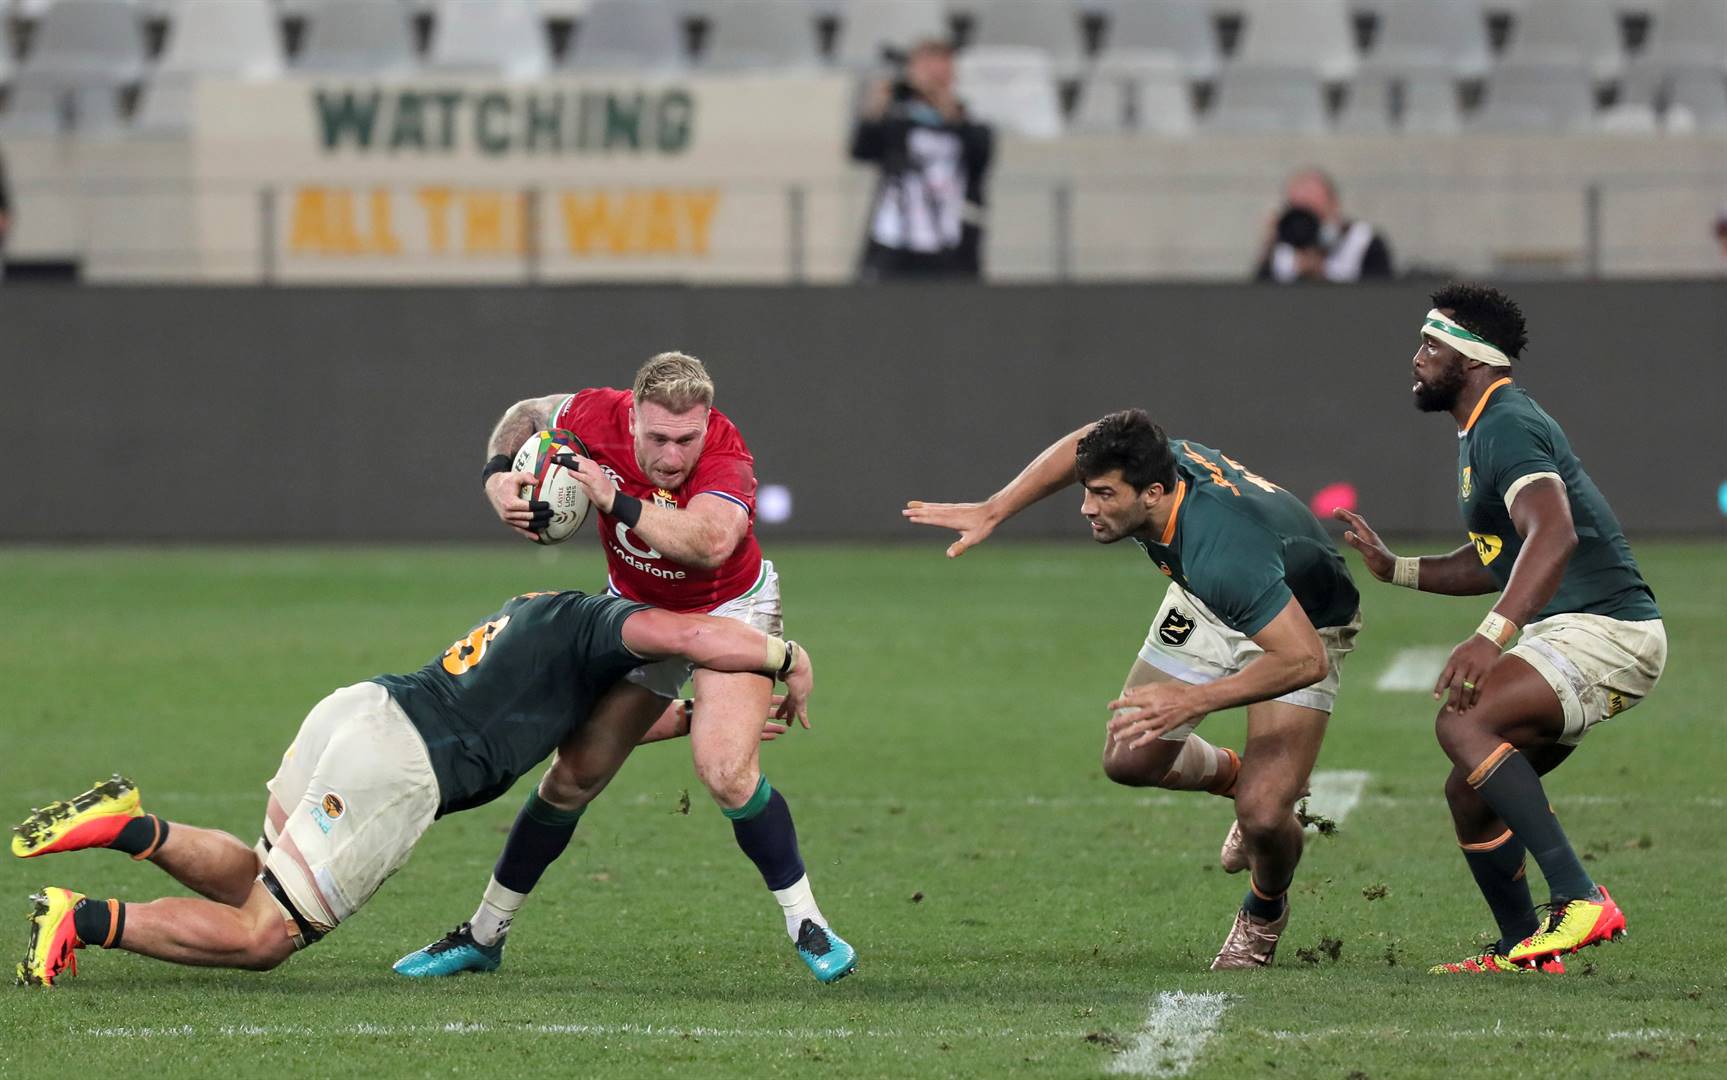 British & Irish Lions’ Stuart Hogg is stopped in his tracks by South Africa’s Jasper Wiese during their second test at Cape Town Stadium on Saturday. Photo: Halden Krog/AP Photo